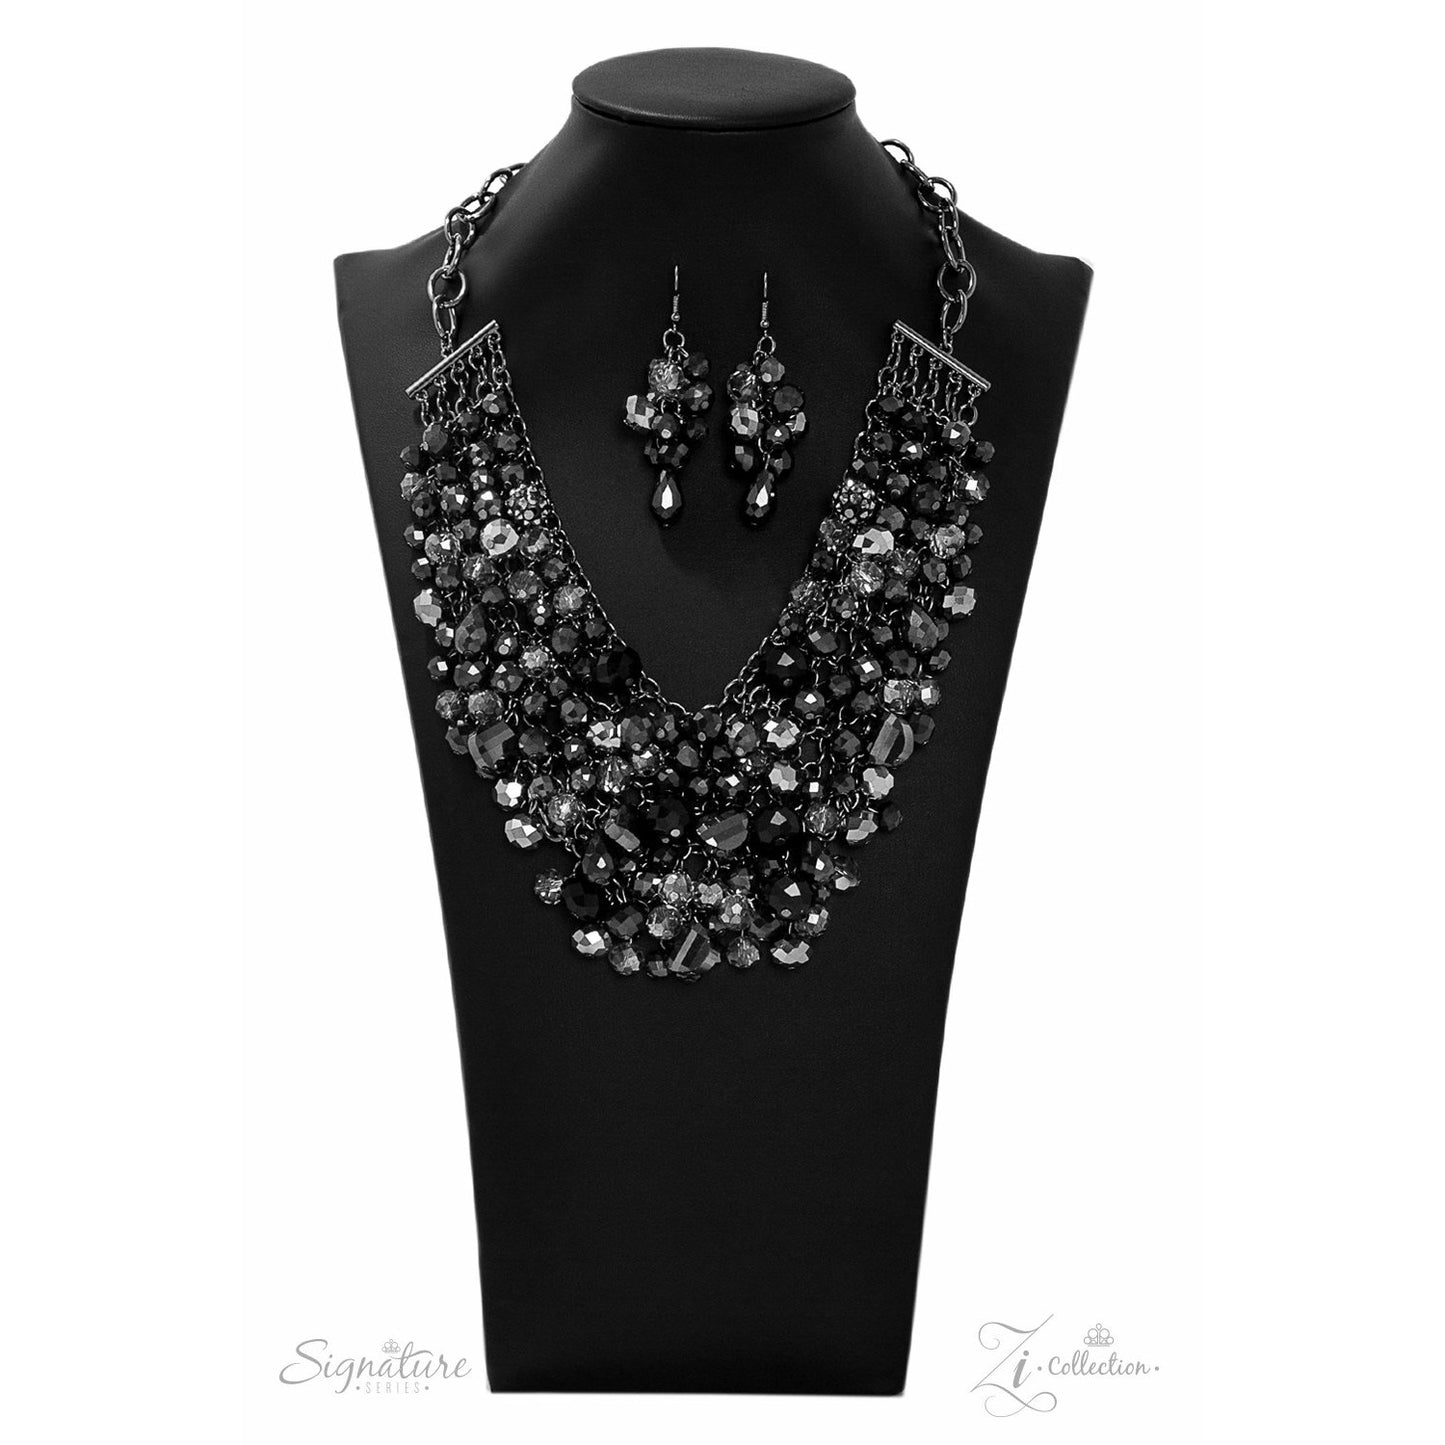 The Taylerleem Zi collection necklace